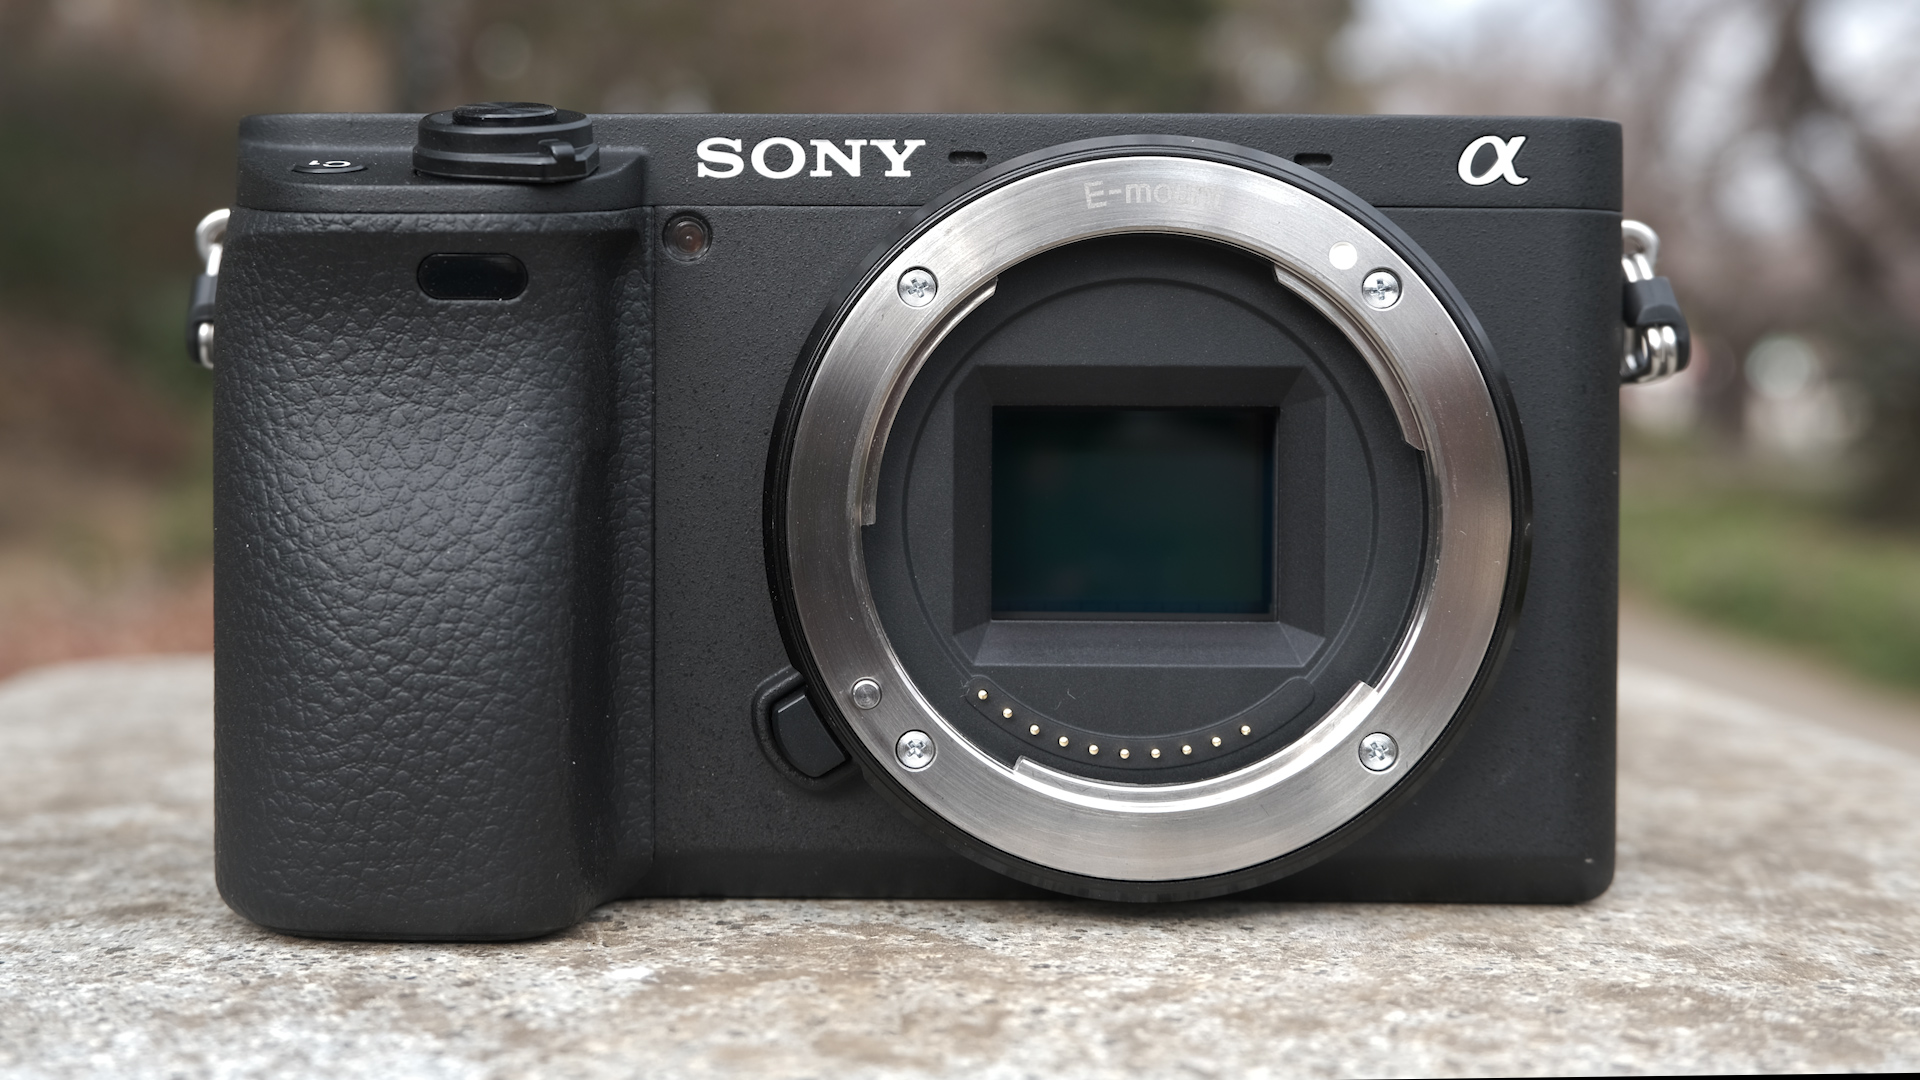 Sony a6400 Review - Is the End of Manual Focus Lenses Near?